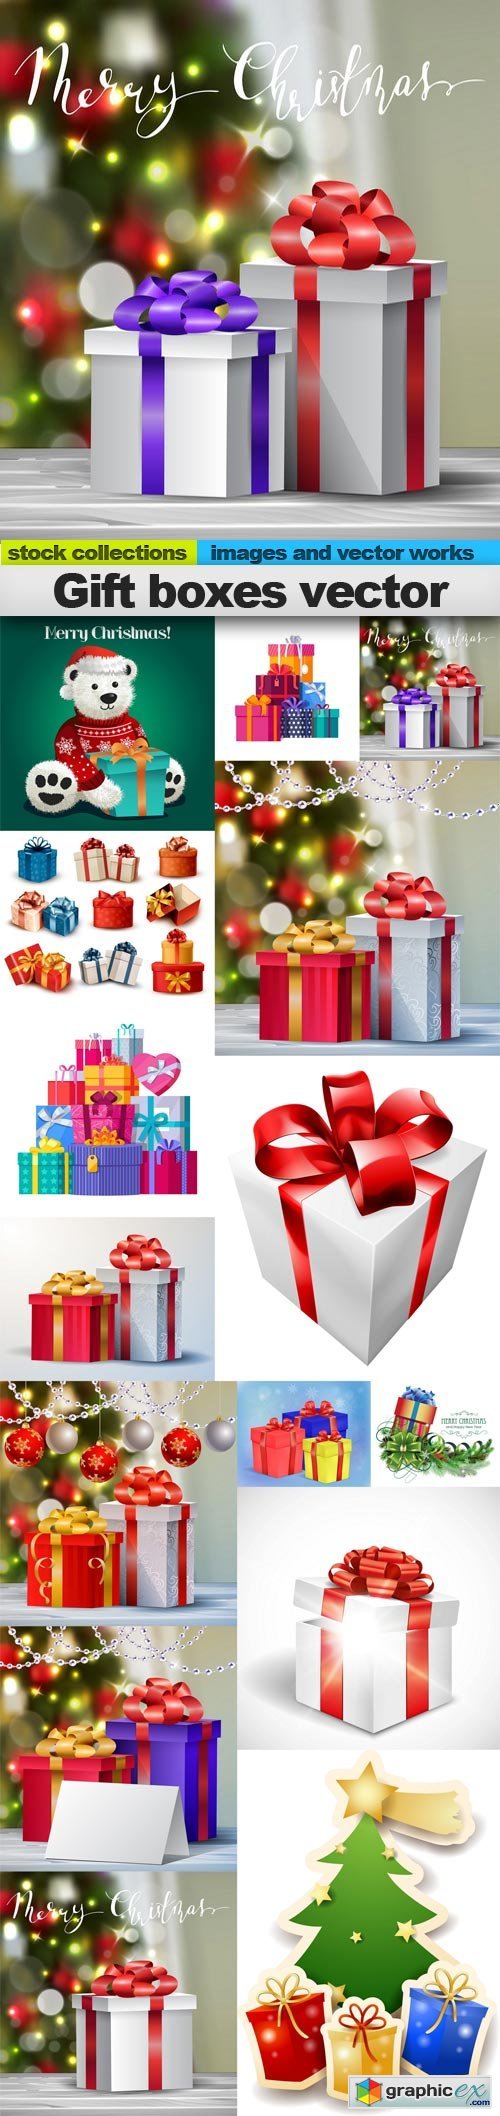 Gift boxes vector, 15 x EPS